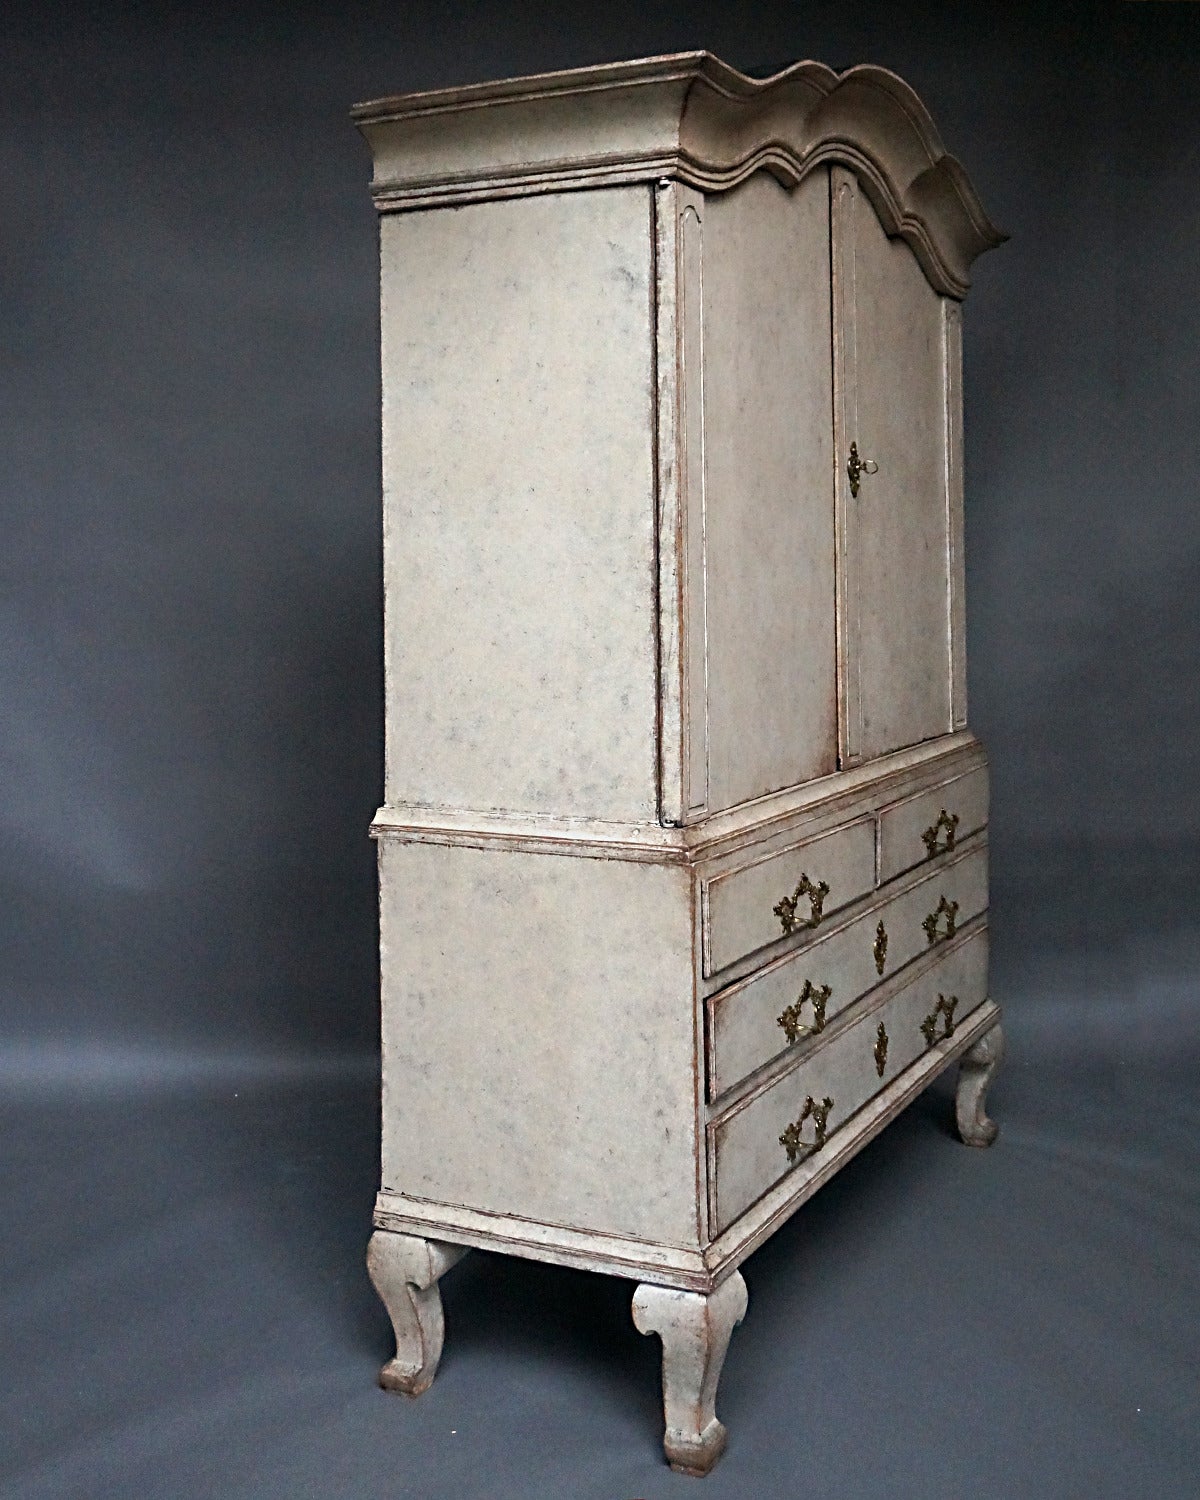 Two part Rococo cabinet, Sweden, circa 1760, with original hardware and interior painted surface. The top section has an arched cornice, carved pilasters and three interior shelves. The lower section has two small drawers over two full-width ones